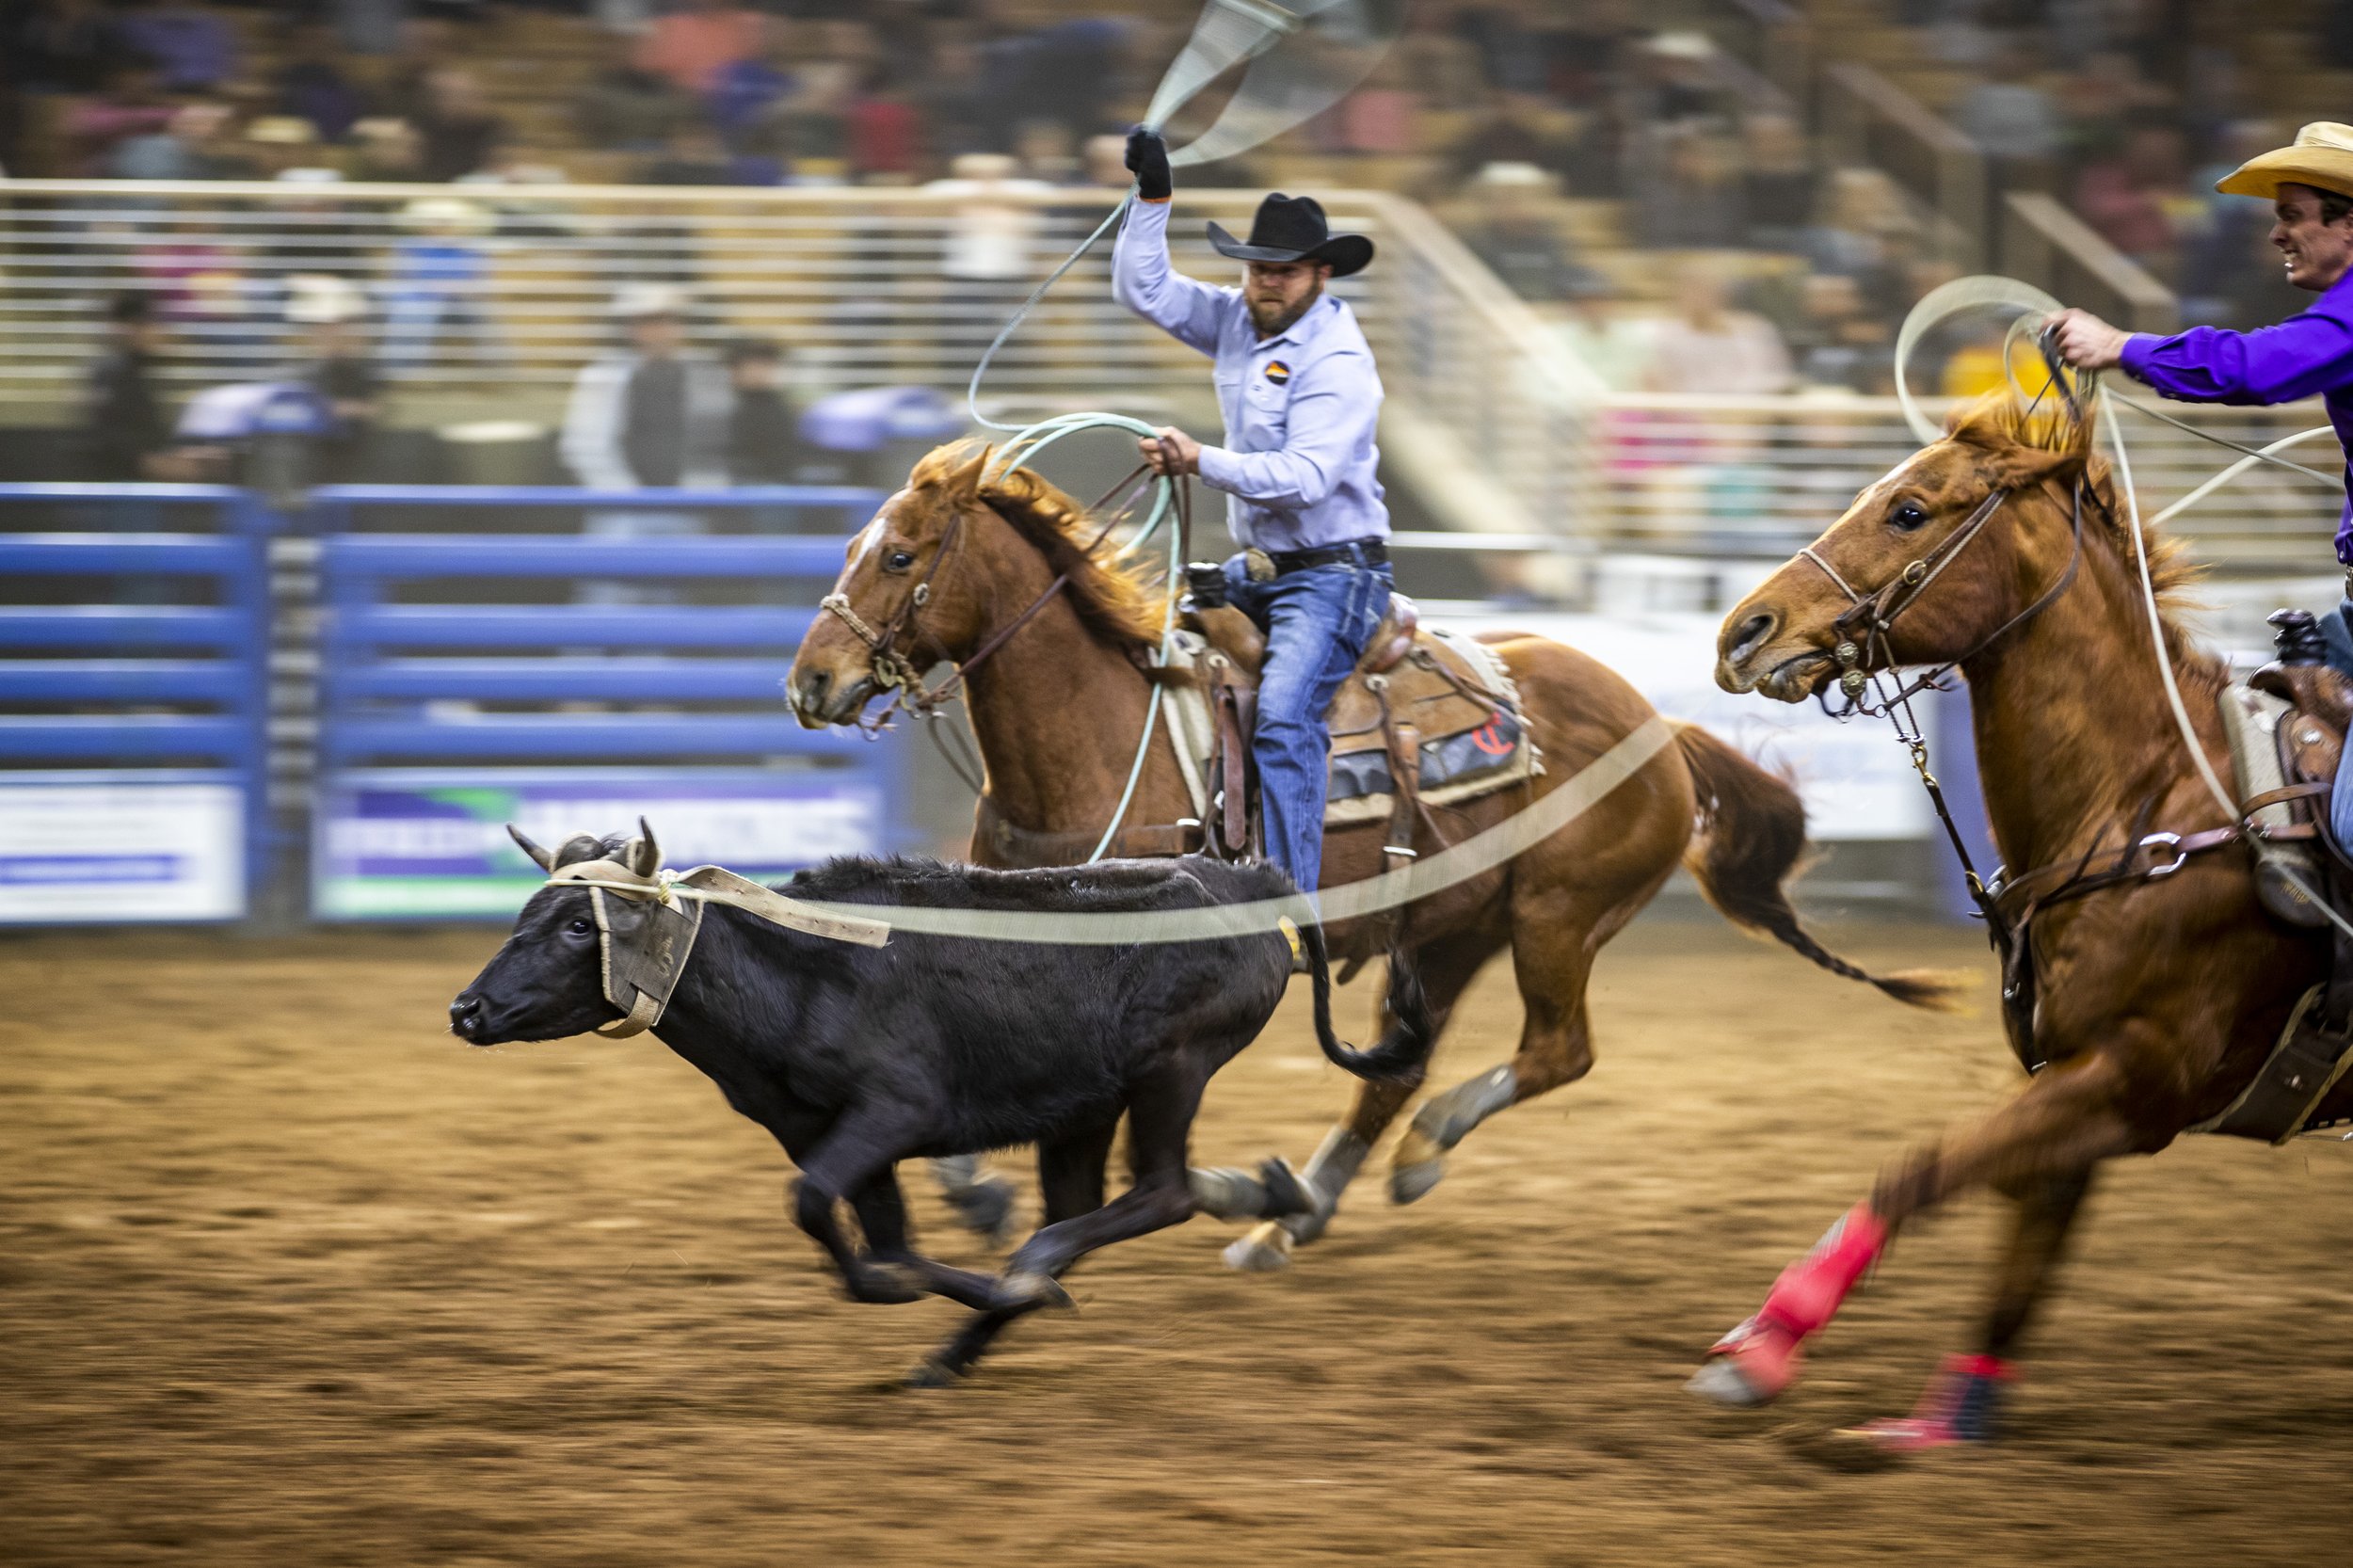  Contestants in the team roping competition chase after a calf during the 144th Silver Spurs Rodeo at Silver Spurs Arena in Kissimmee, Florida. 